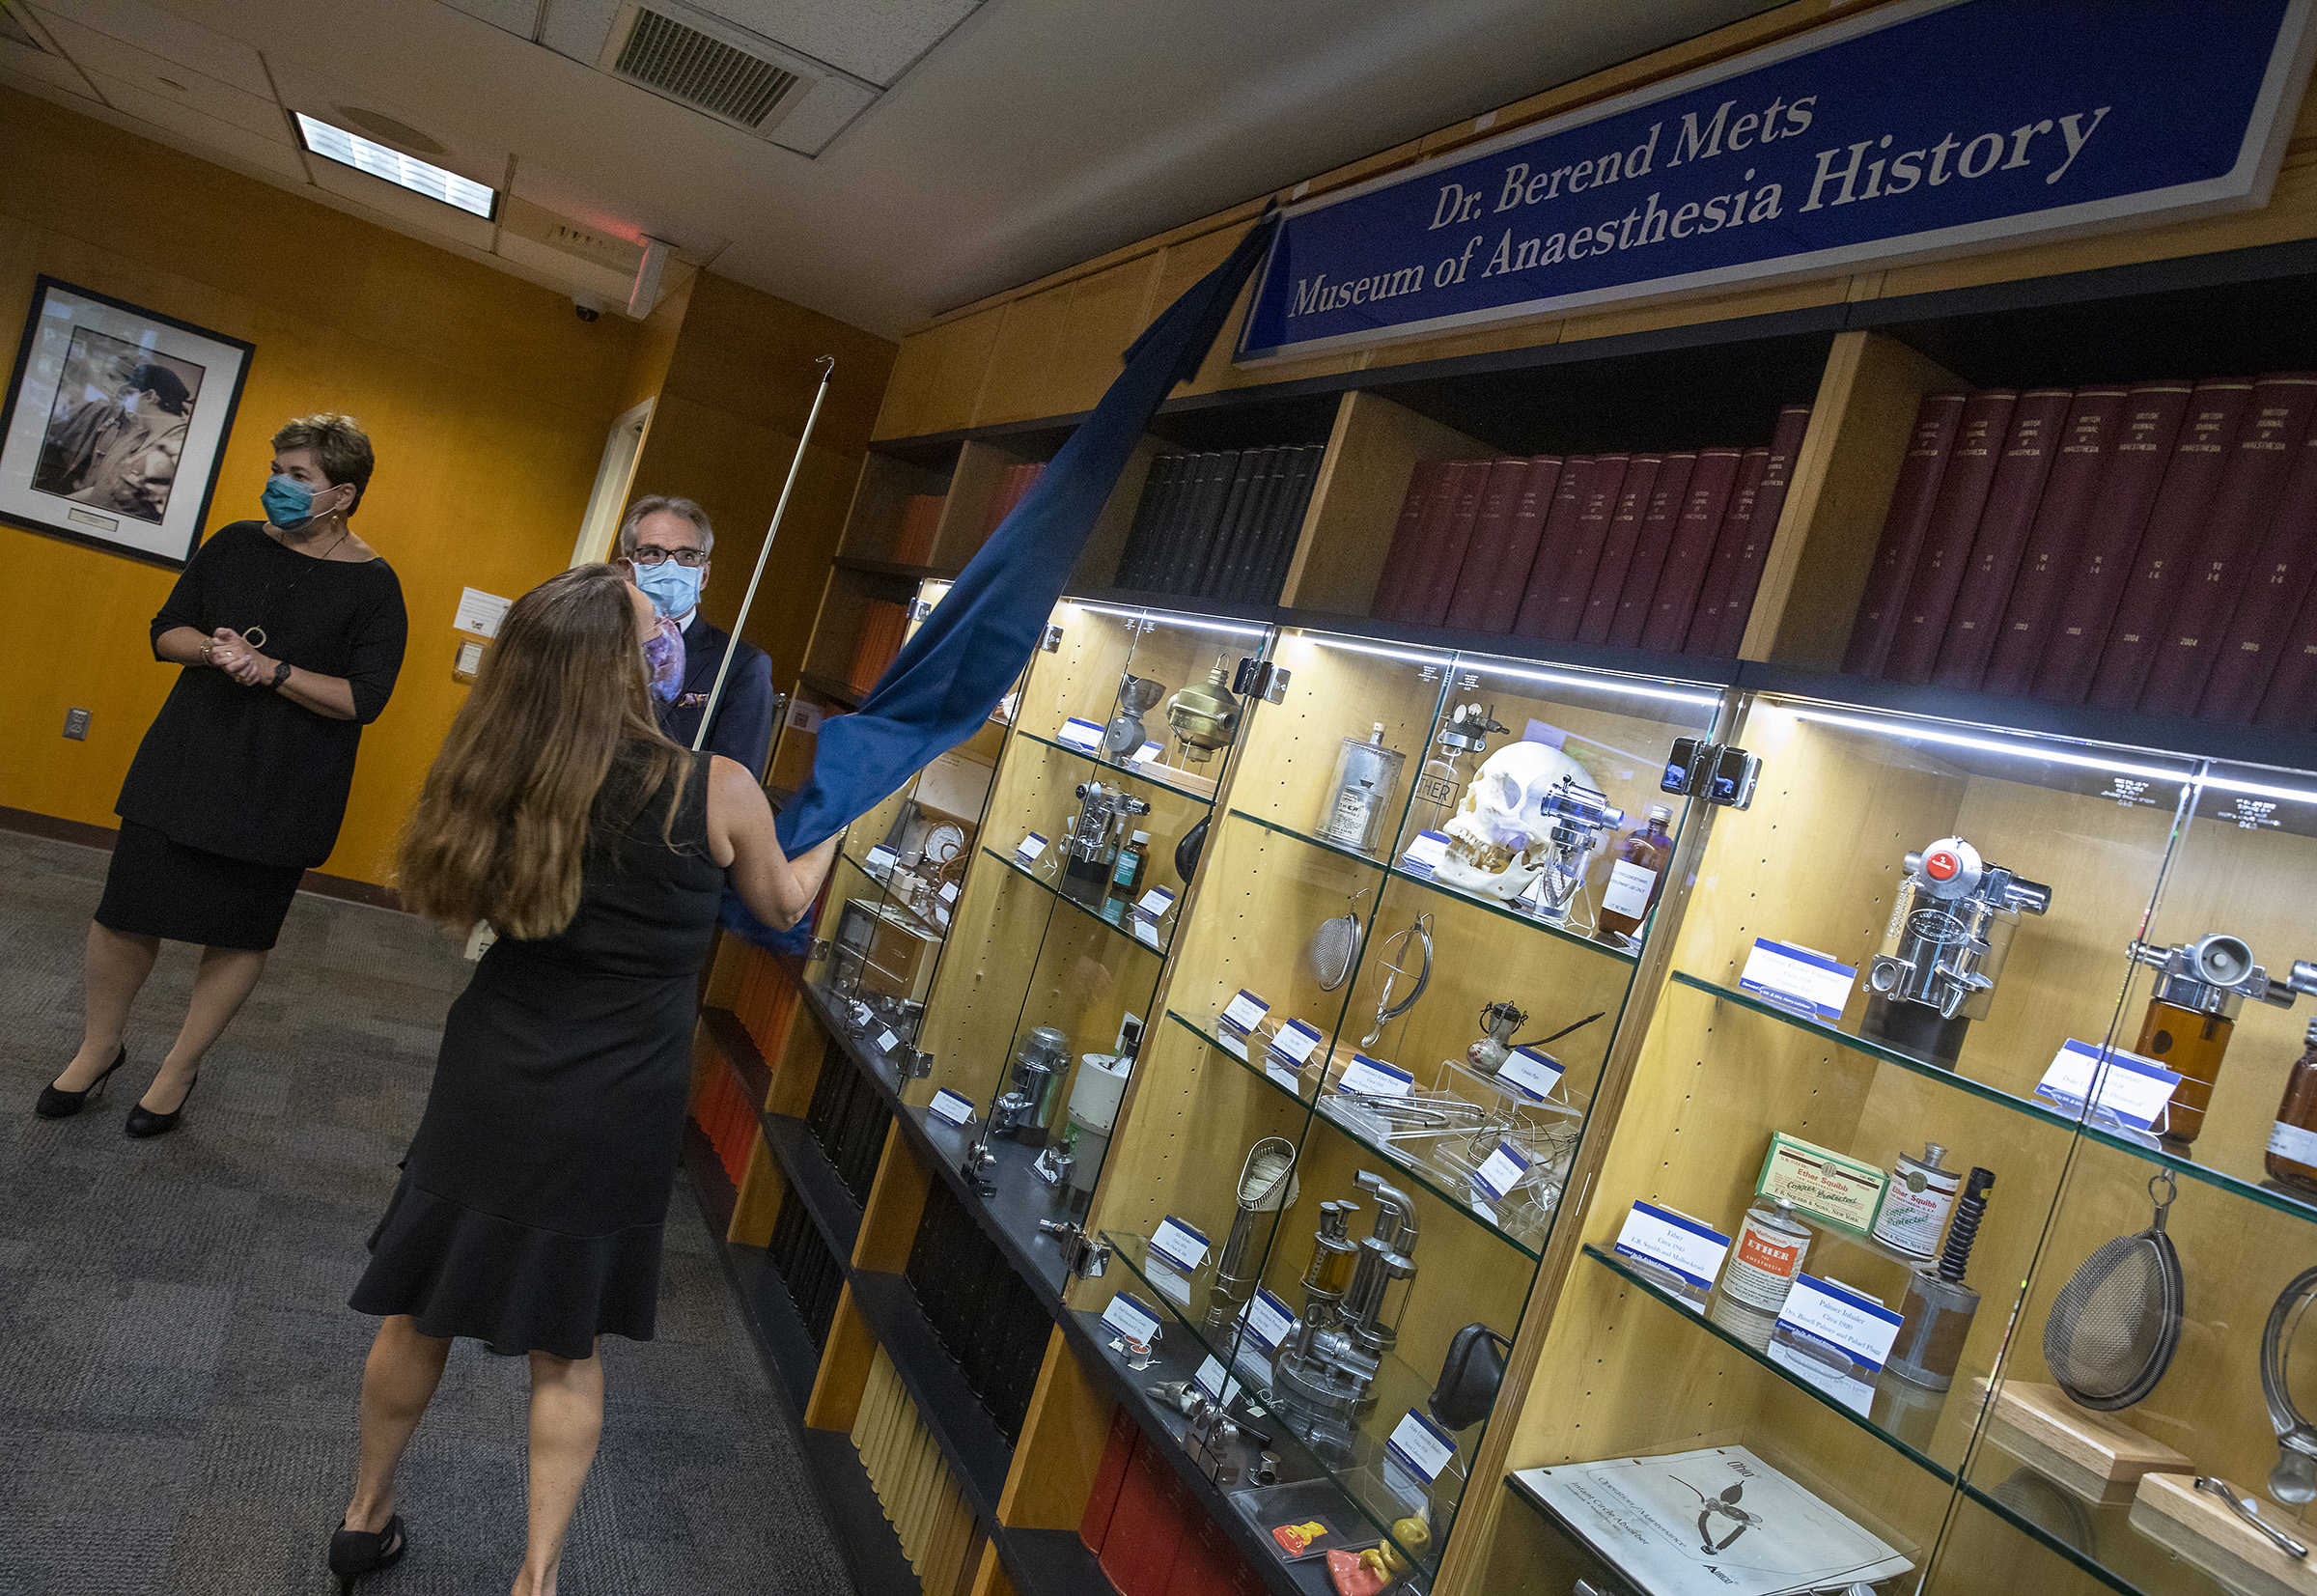 A woman pulls a covering off the sign reading Dr. Berend Mets Museum of Anaesthesia History hanging above a large display case, while a man looks on and a woman stands nearby.